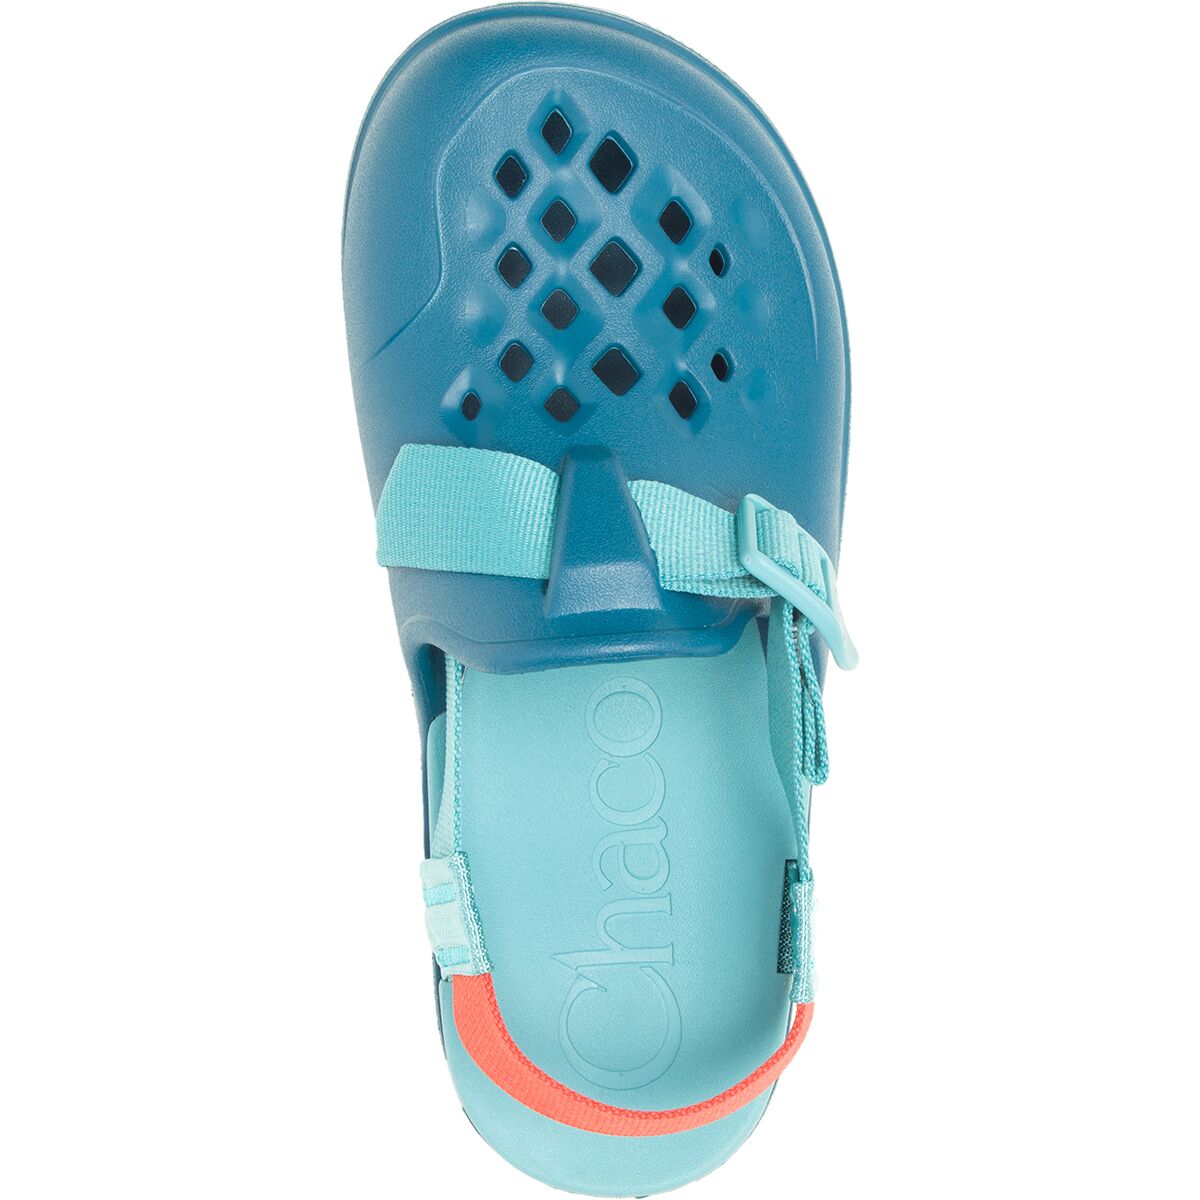 Chaco Chillos Clog - Women's - Footwear